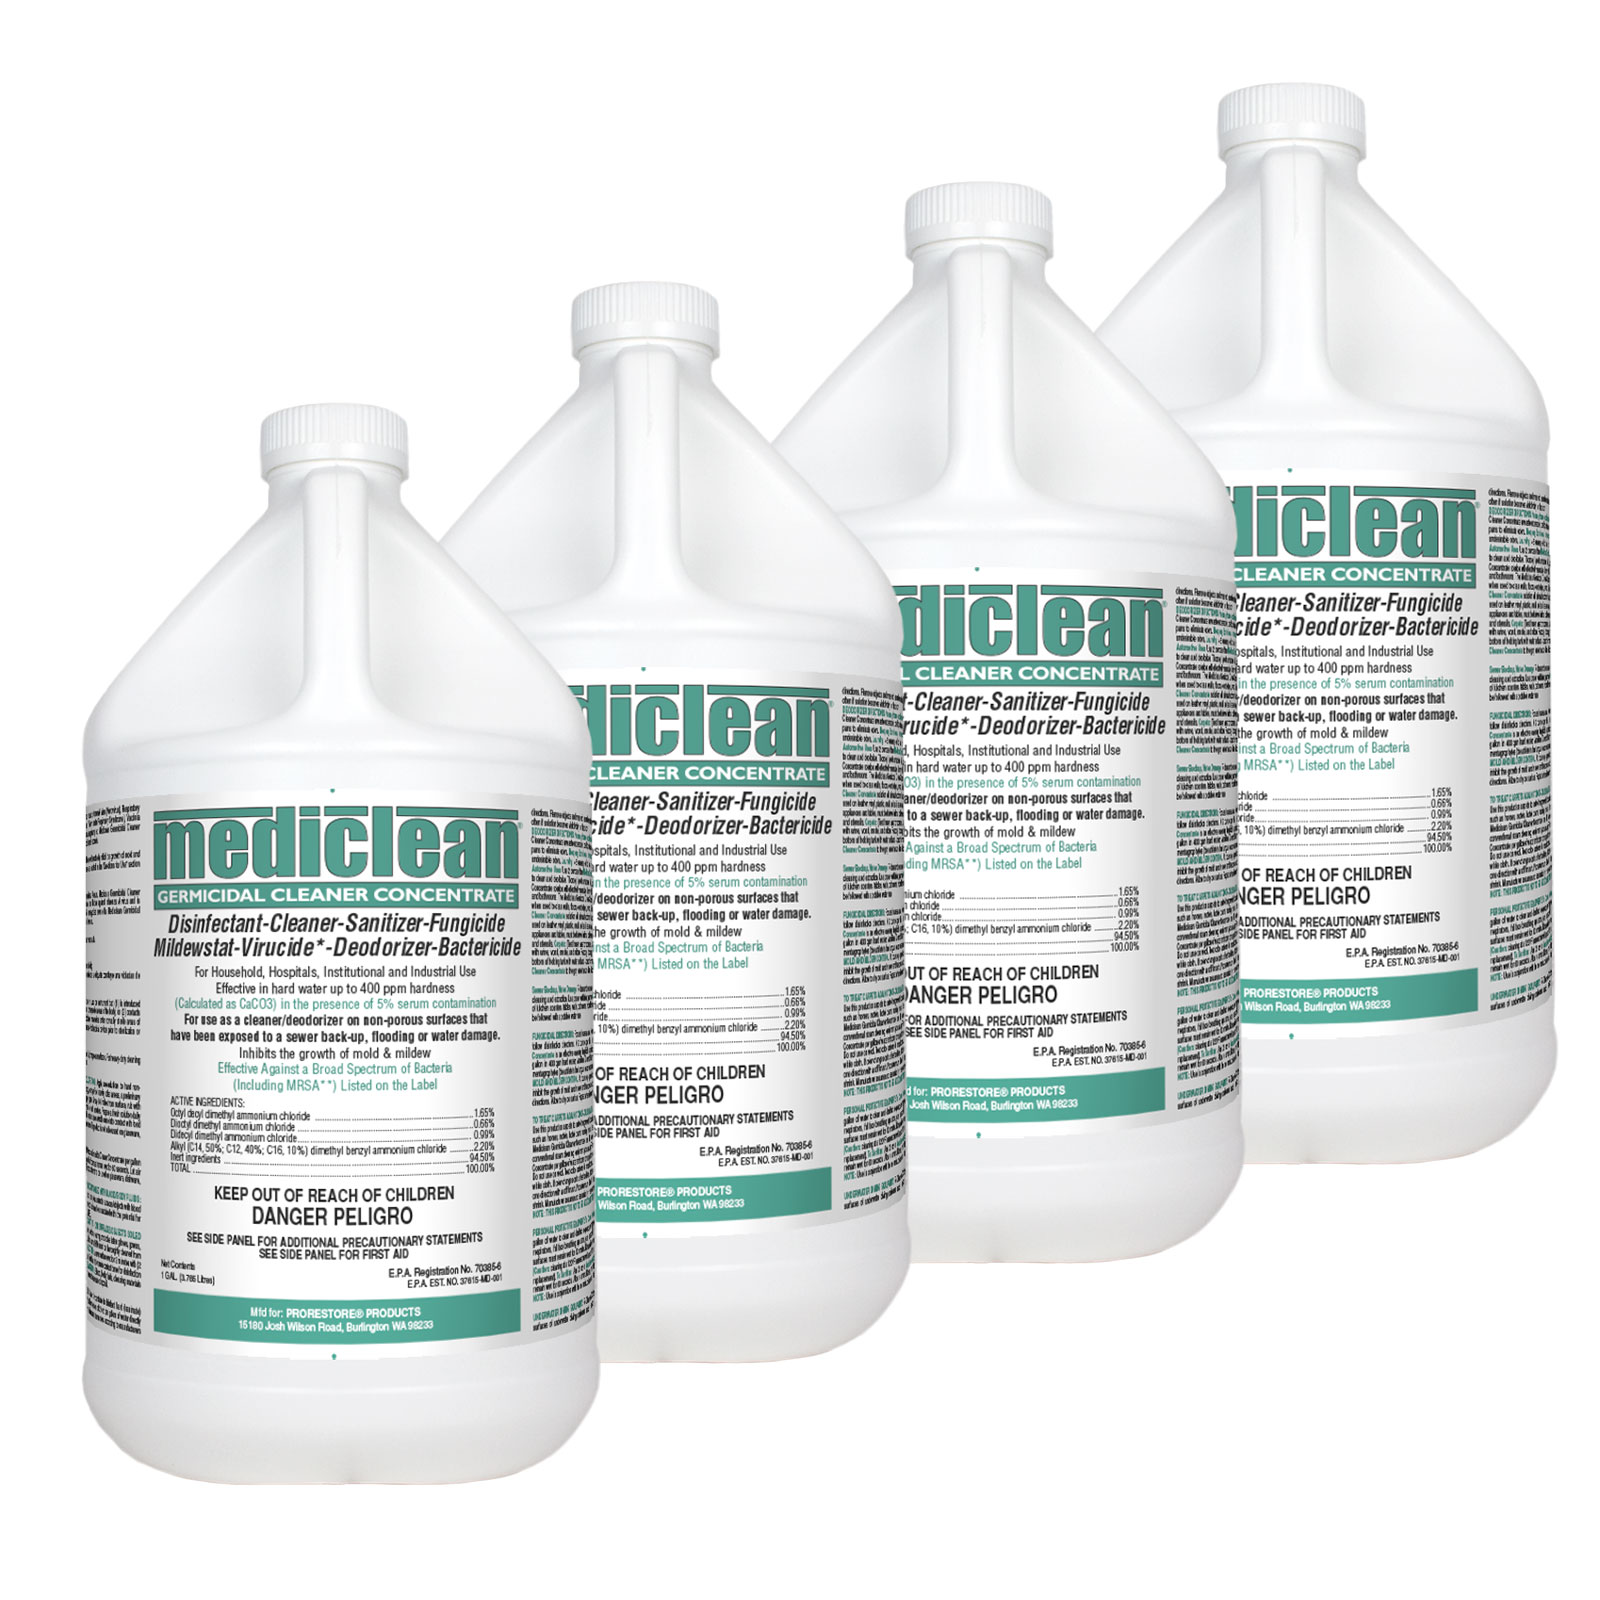 Prorestore 109159 Microban Mediclean QGC Germicidal Cleaner Concentrate MINT 4/1 Gallon CASE Chemspec 221592905 F306 in Stock